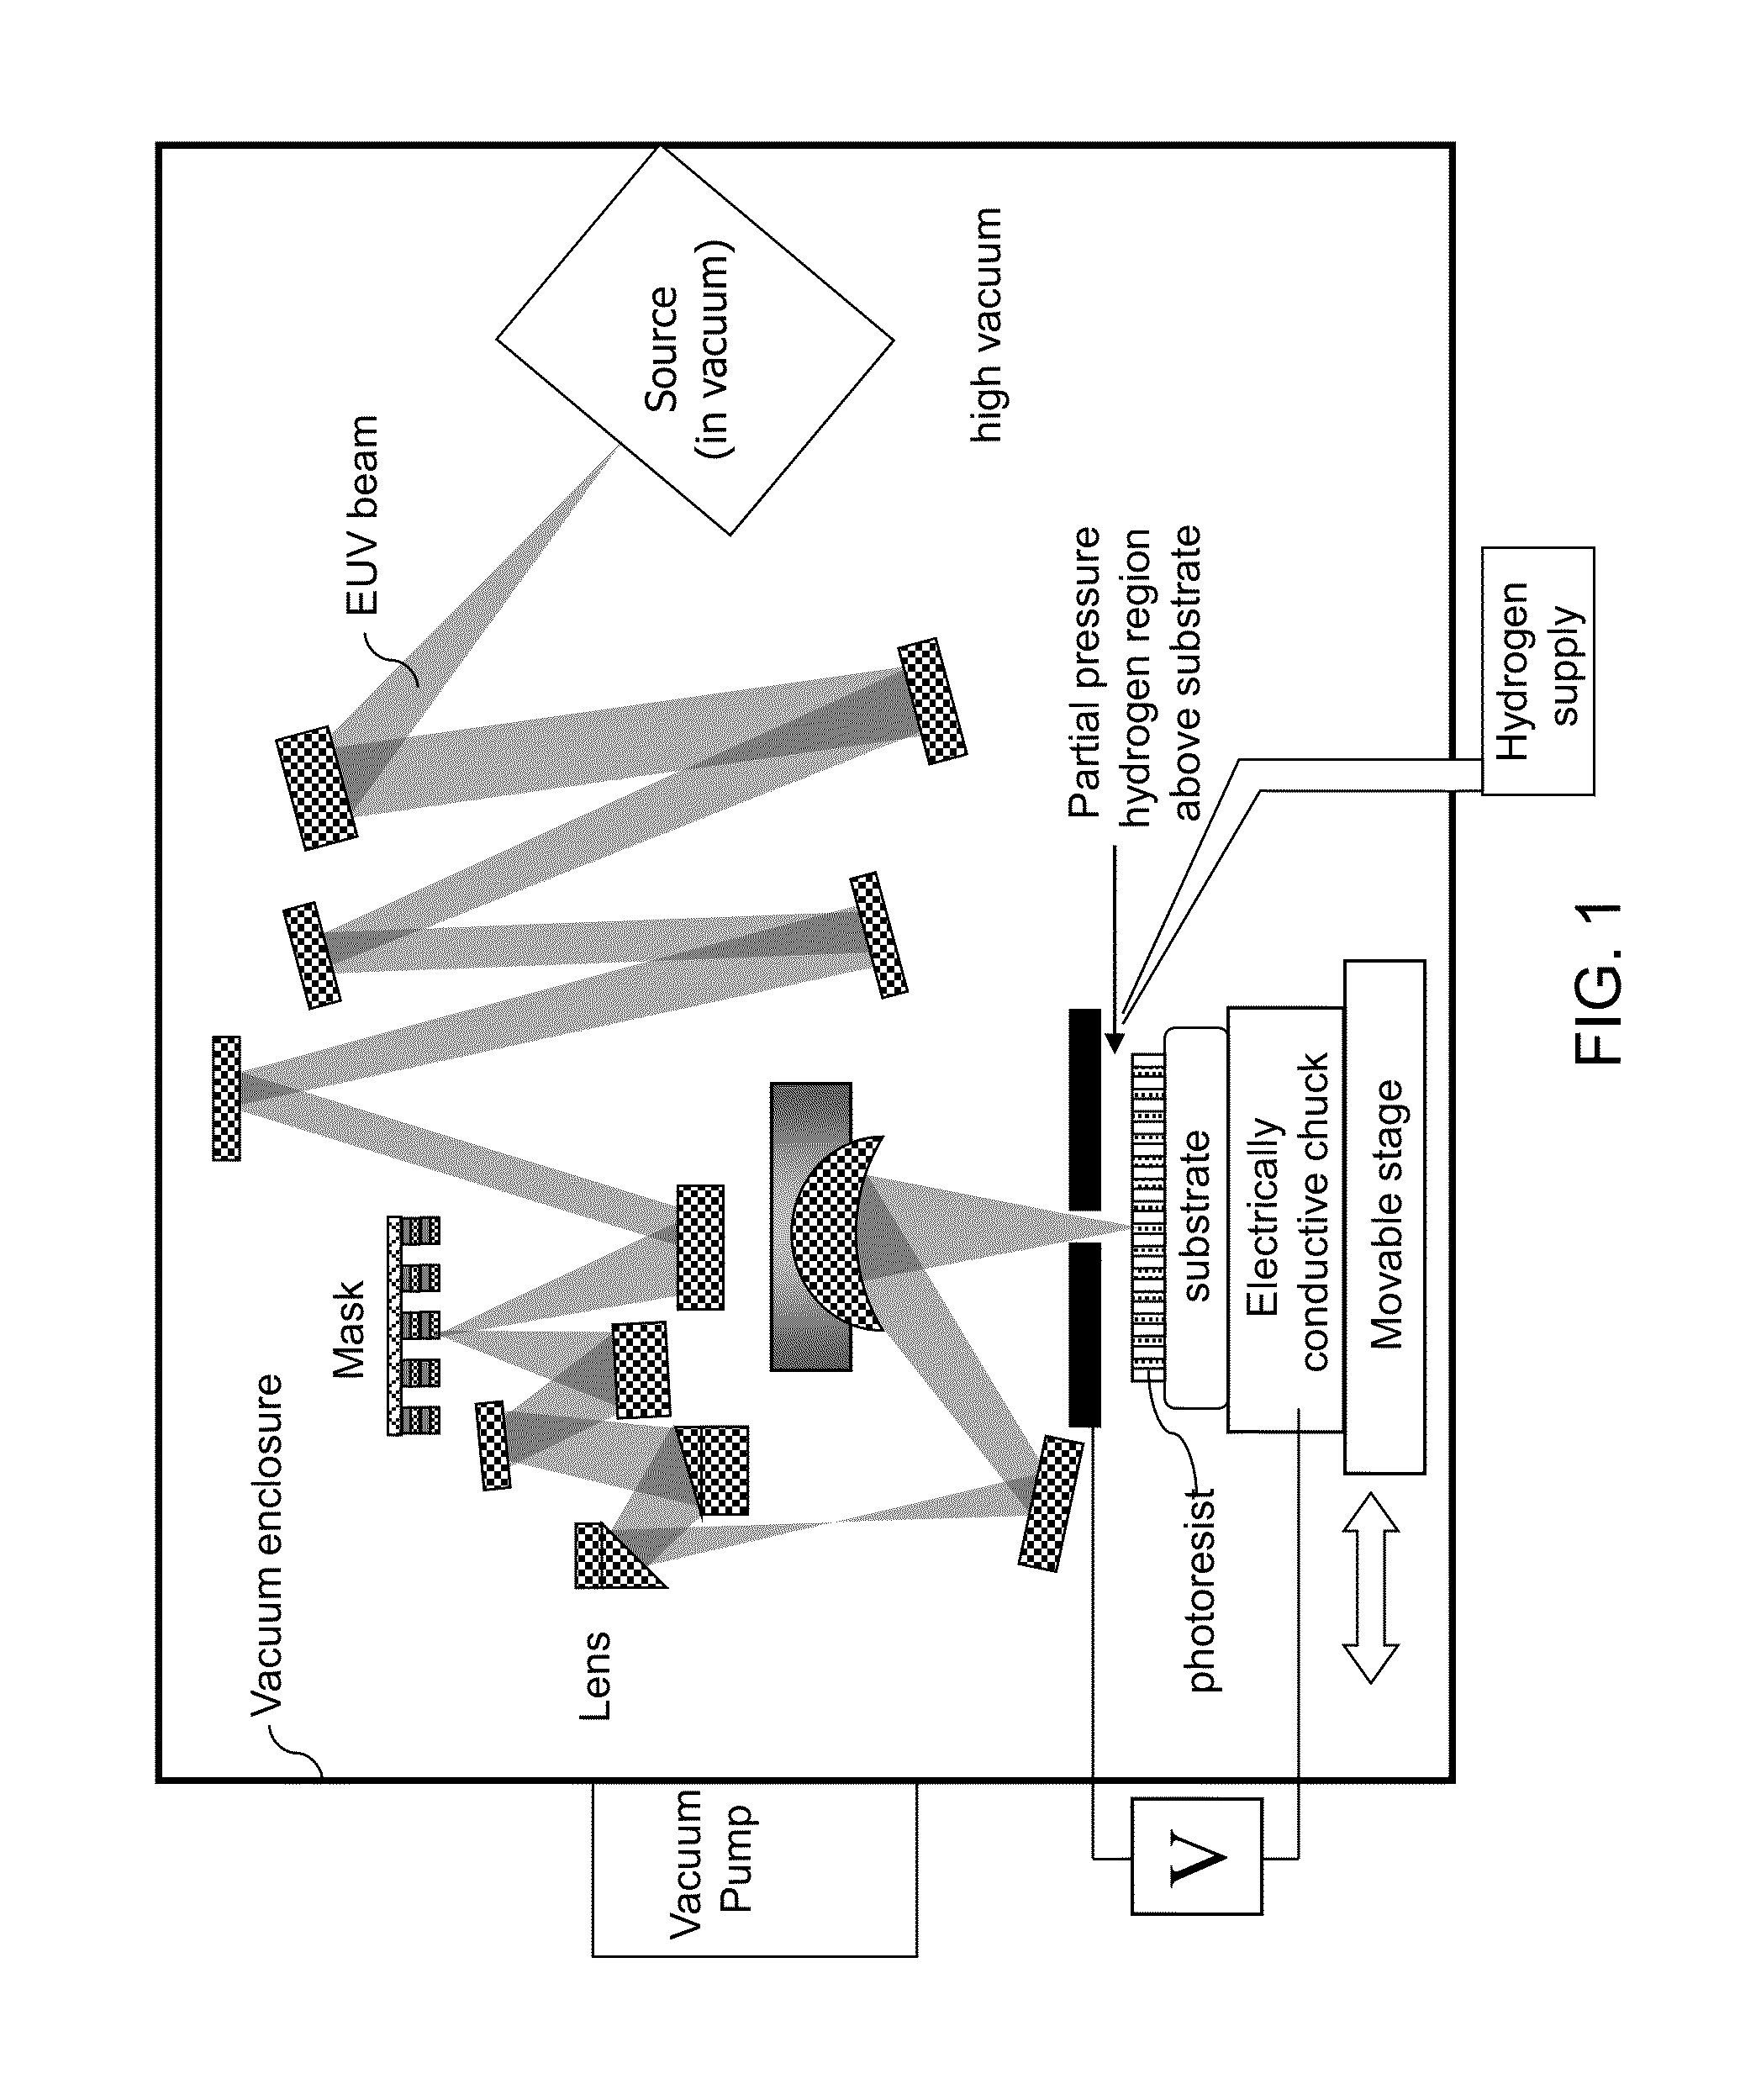 Amplification Method For Photoresist Exposure In Semiconductor Chip Manufacturing